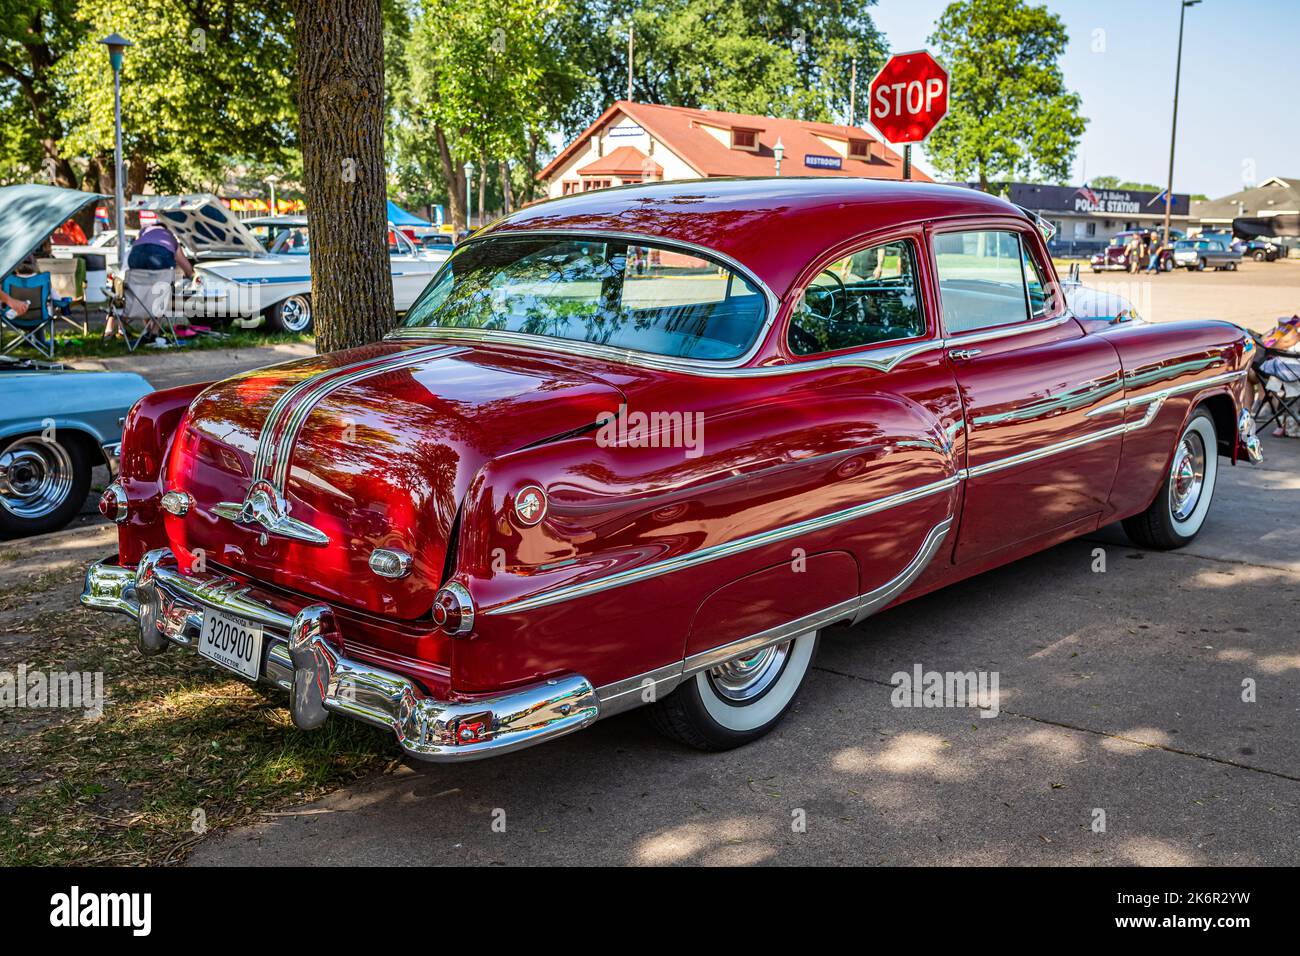 Falcon Heights, MN - June 19, 2022: High perspective rear corner view of a 1953 Pontiac Chieftain 2 Door Sedan at a local car show. Stock Photo